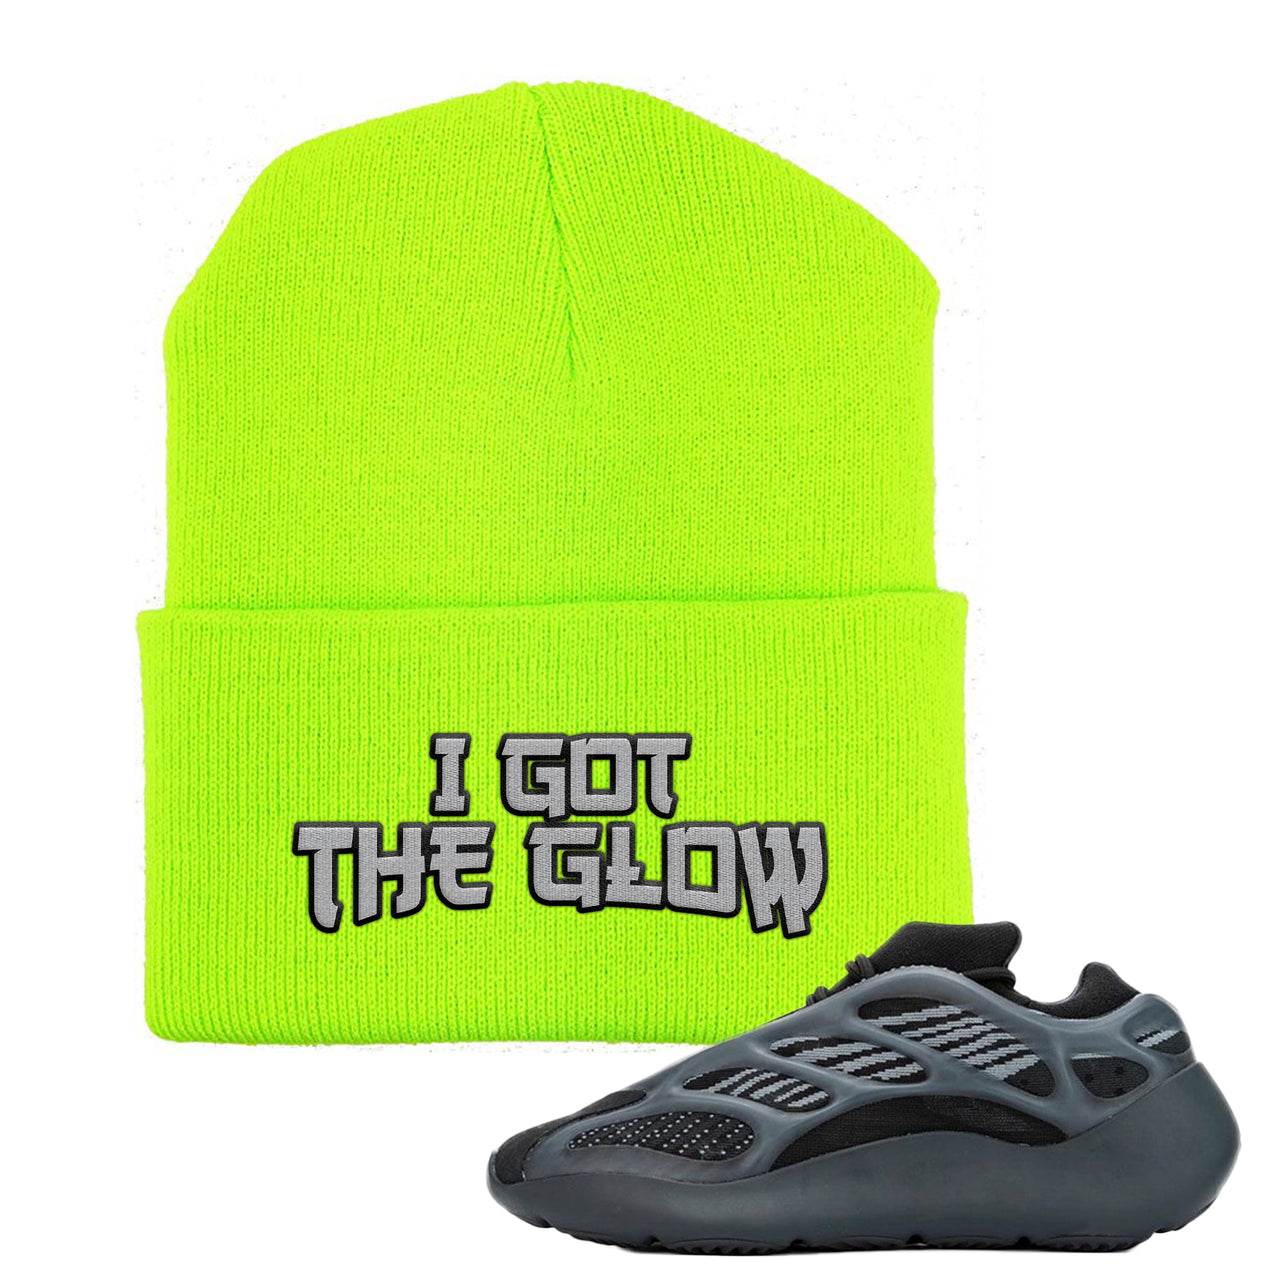 Alvah v3 700s Sneaker Neon Green Beanie | Beanie to match Alvah v3 700s Shoes | I Got The Glow